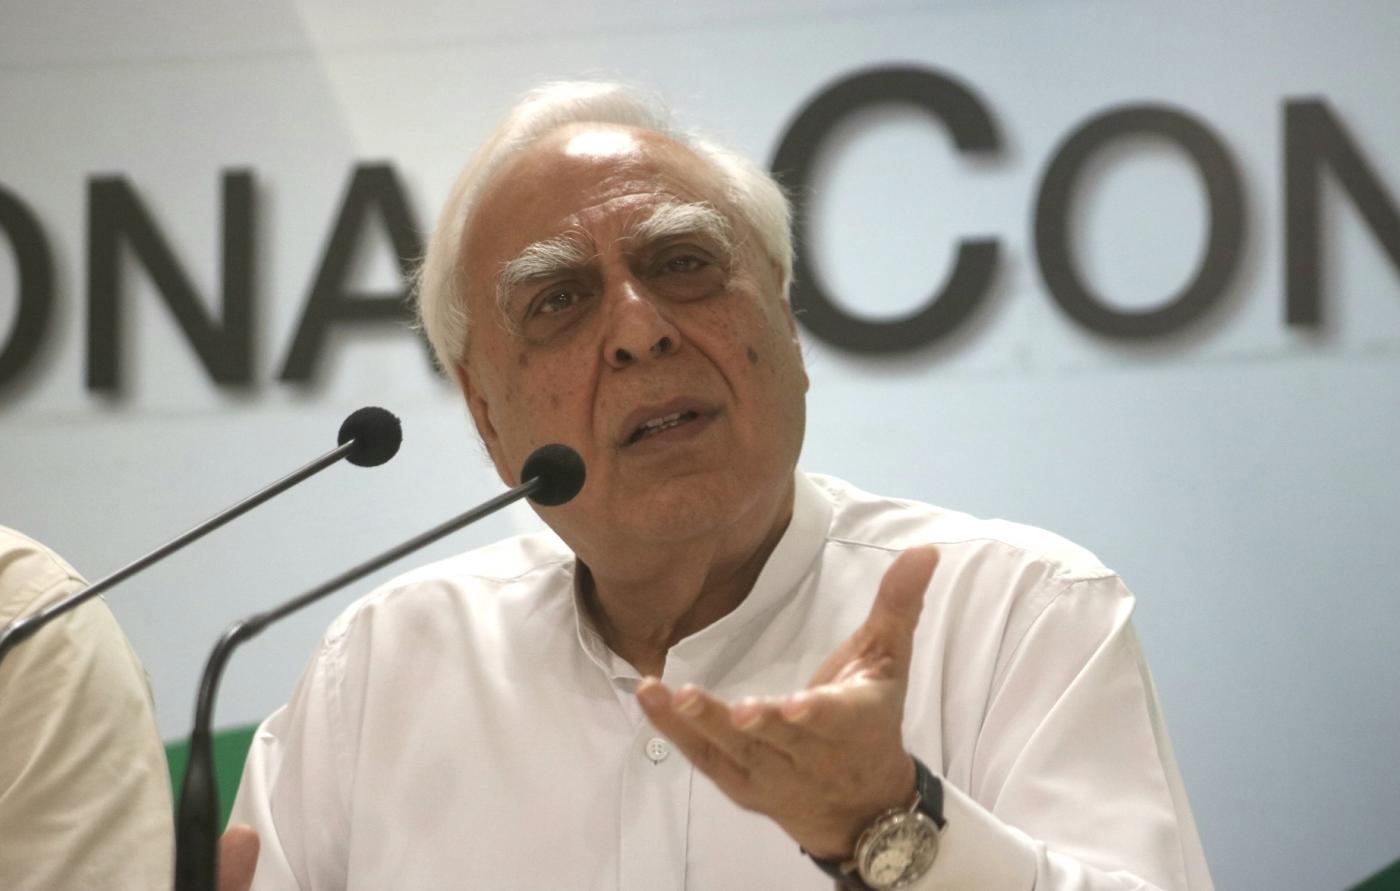 New Delhi: Congress leader Kapil Sibal addressing a press conference on CJI impeachment case in New Delhi on May 8, 2018. (Photo: IANS) by .